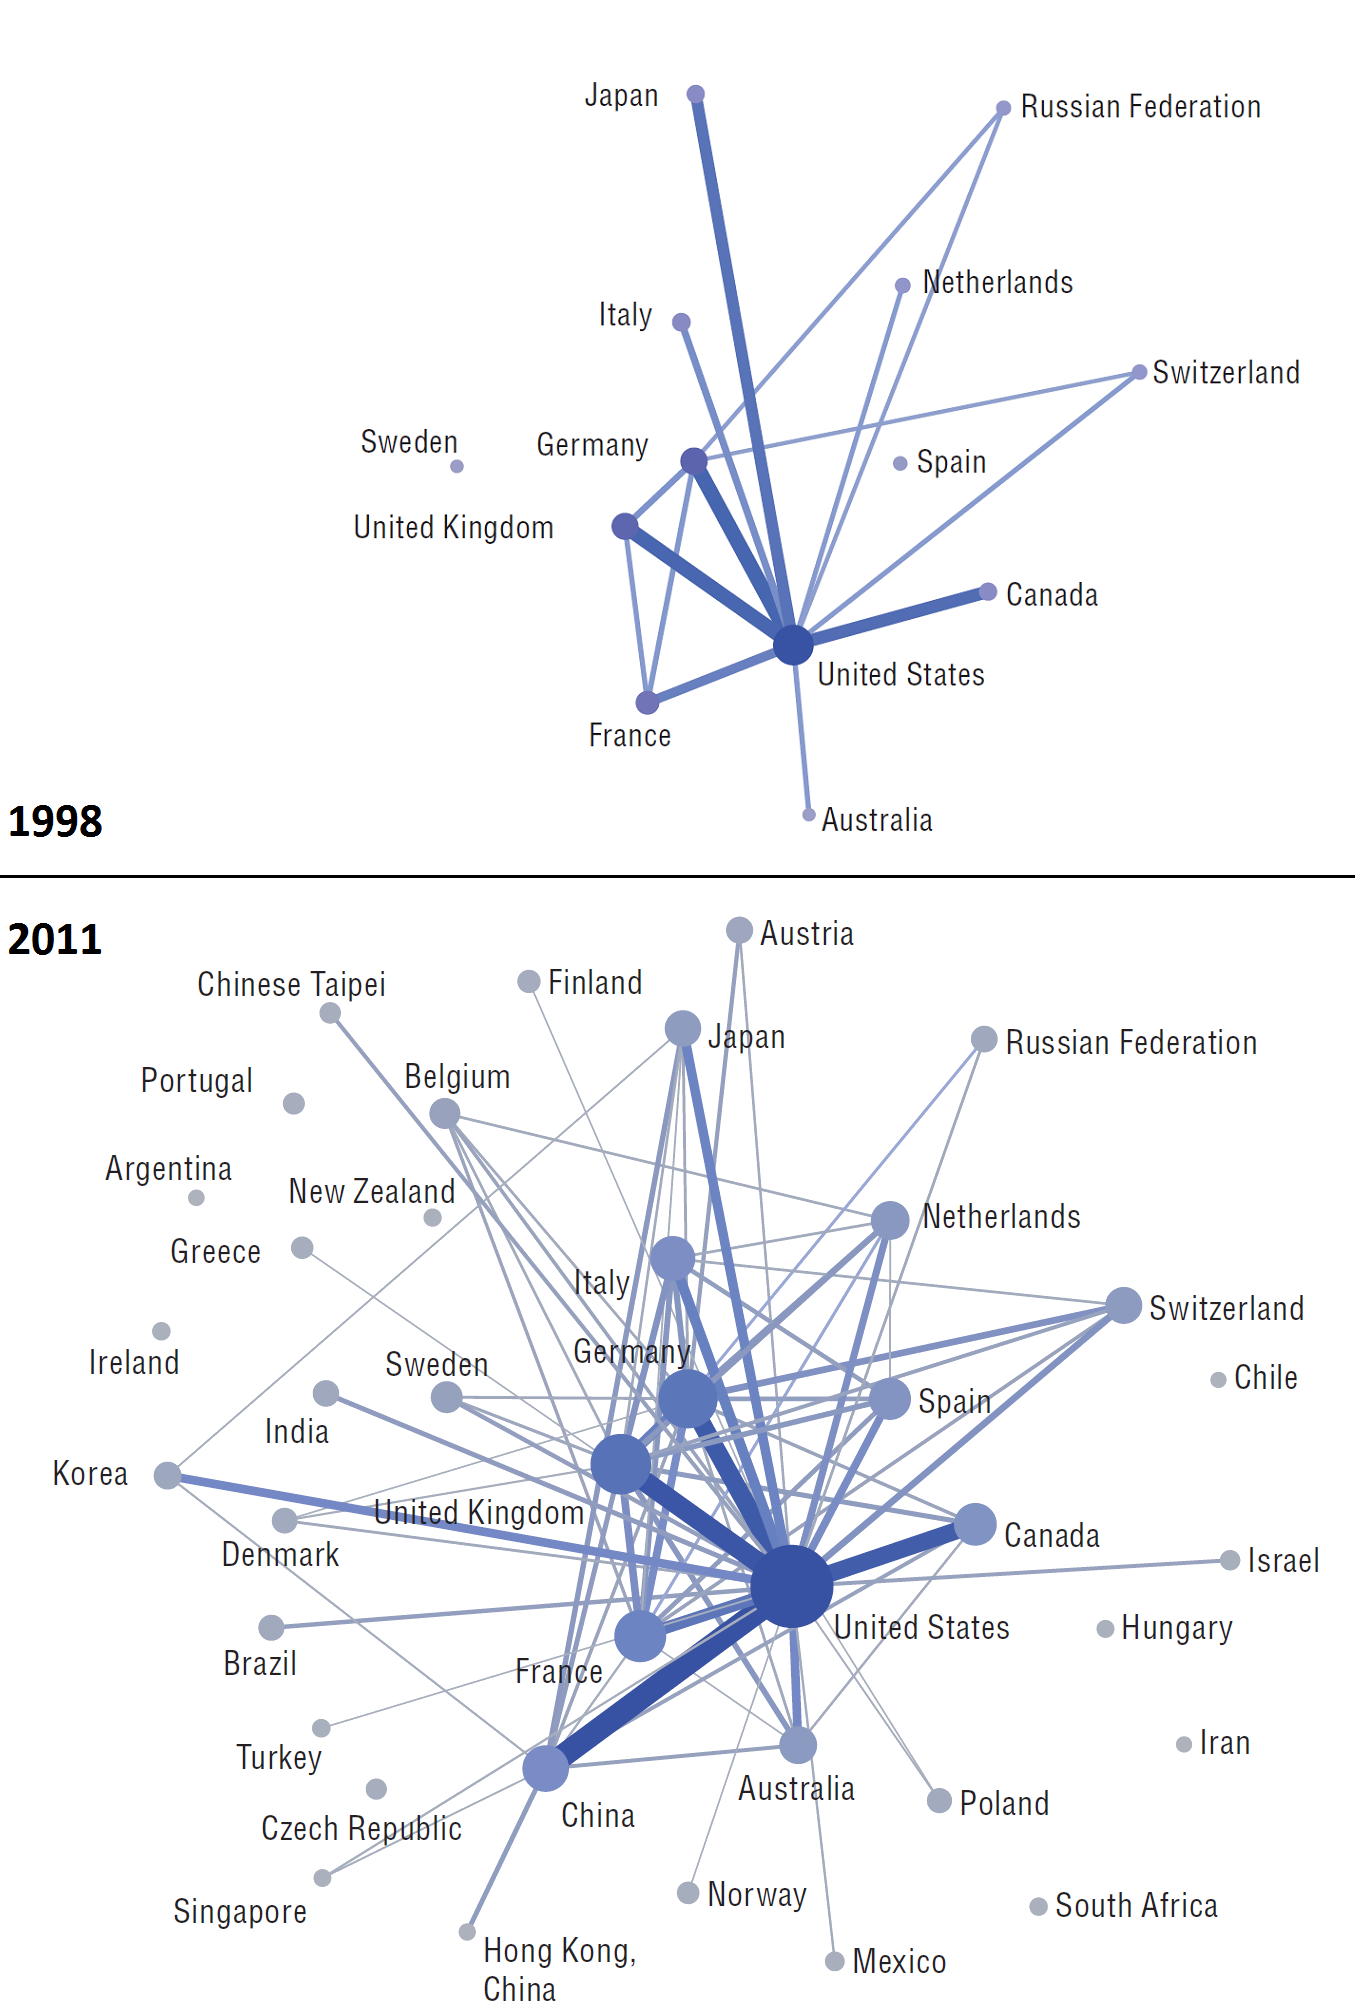 International collaboration networks in science